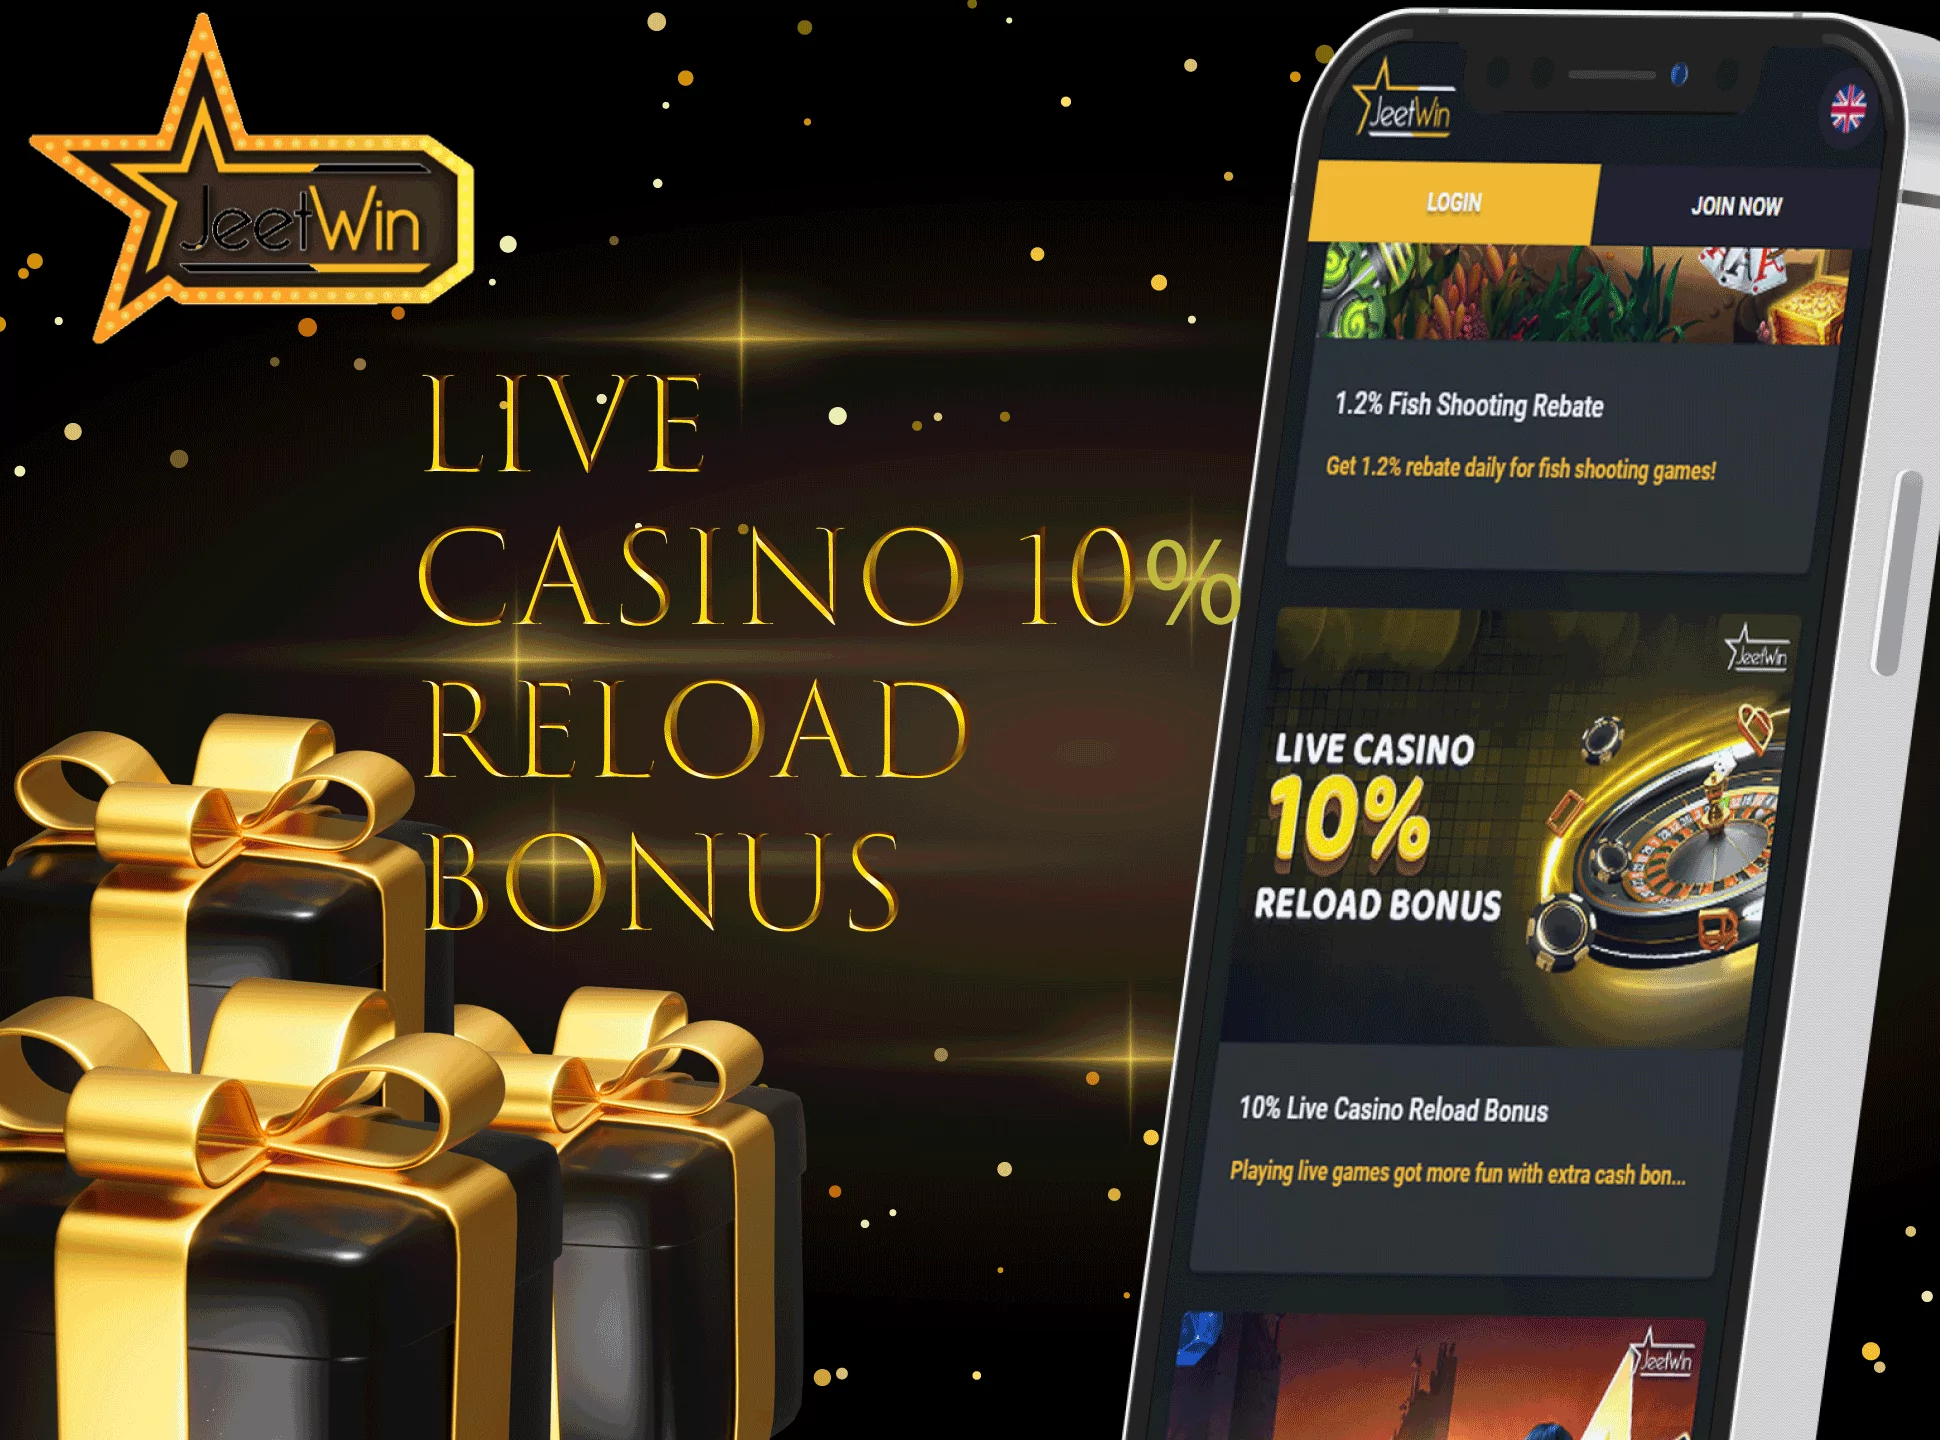 There is also a 10% reload bonus in the Jeetwin casino.